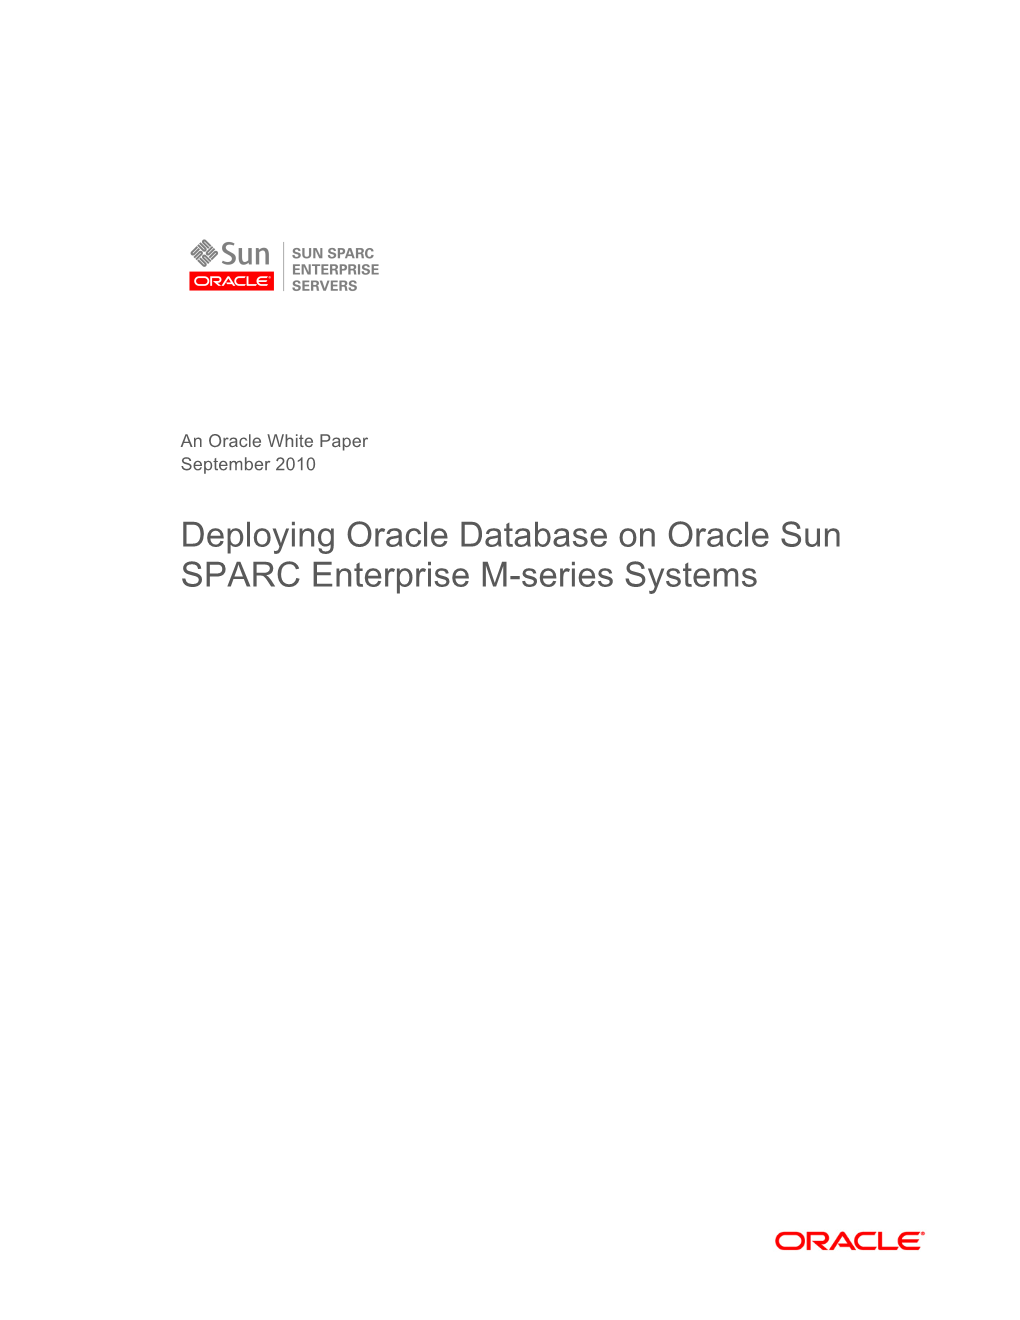 Deploying Oracle Database on Oracle Sun SPARC Enterprise M-Series Systems